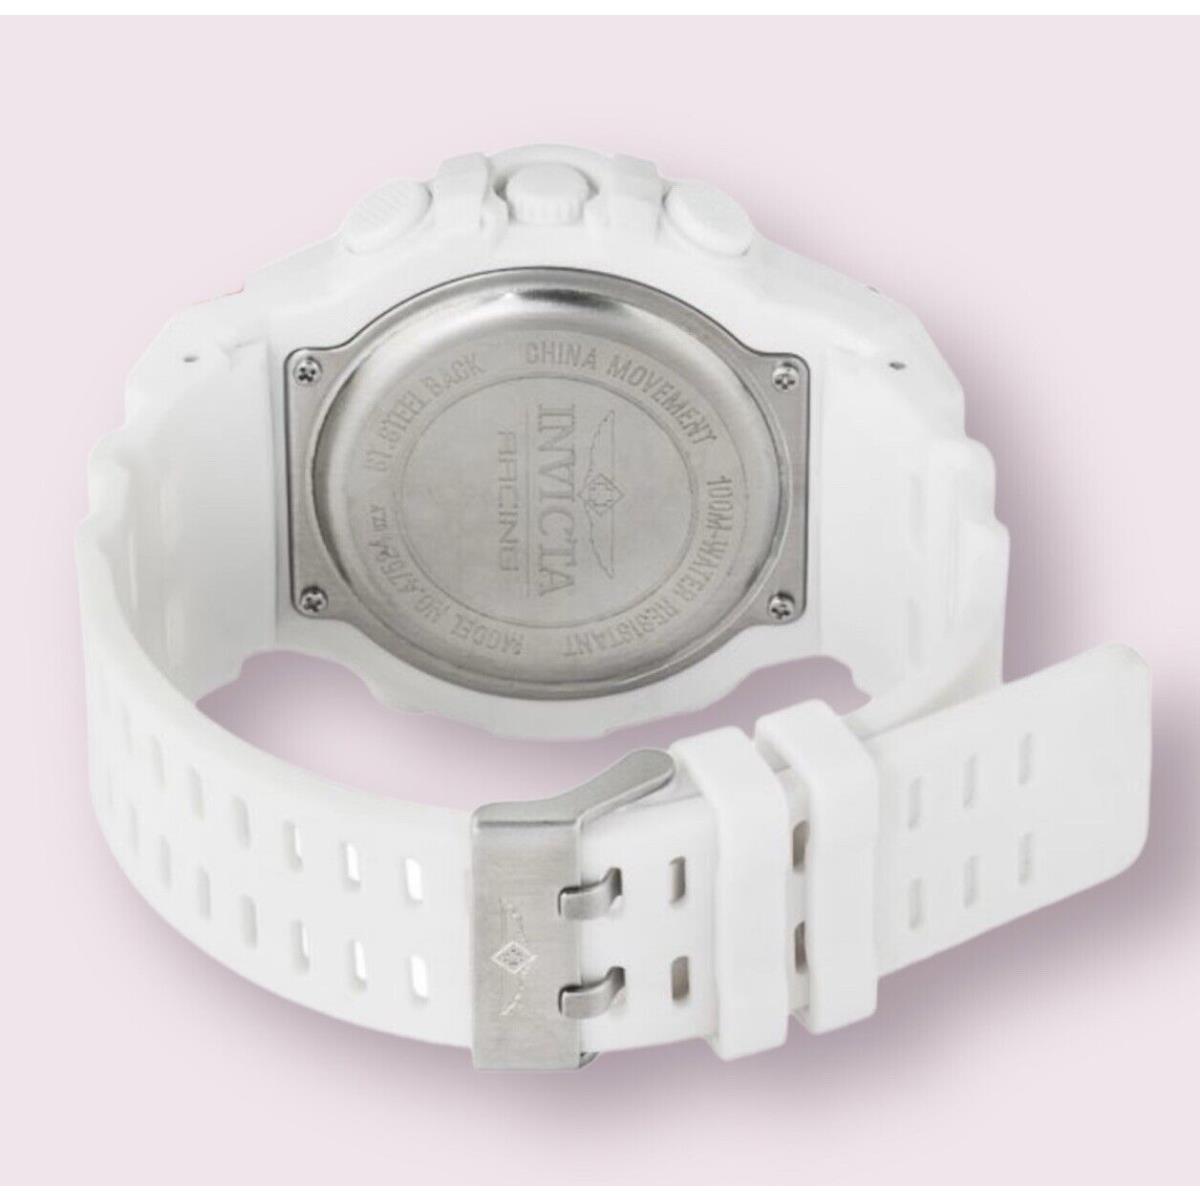 Invicta Racing Digital Men`s Watch 47524 - 52mm All White Resin Band